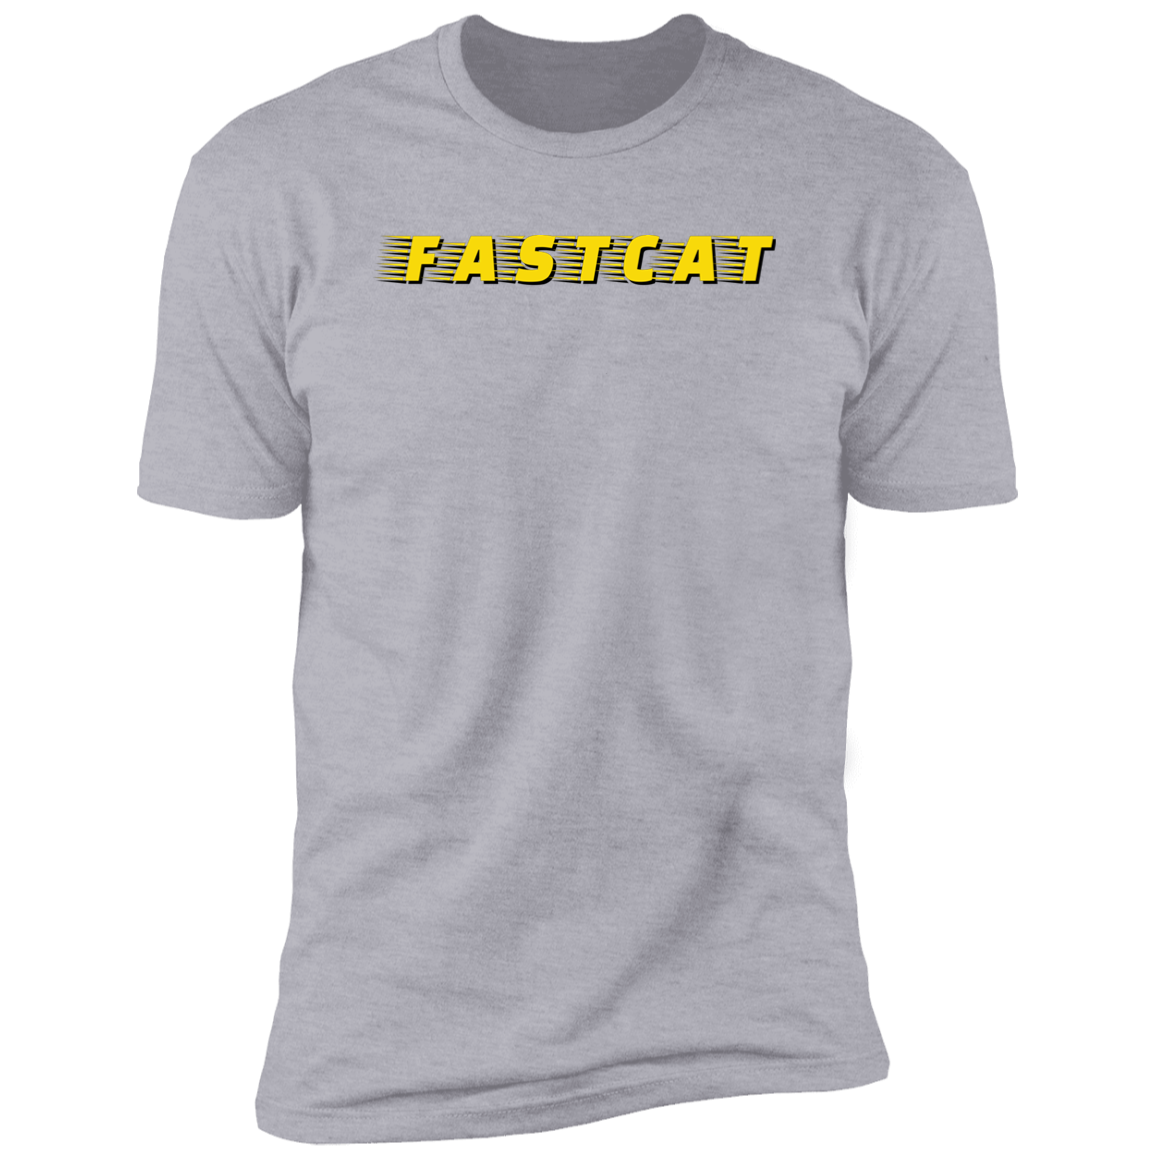 FastCAT Dog T-shirt, sporting dog t-shirt for humans, FastCAT t-shirt, in light heather gray